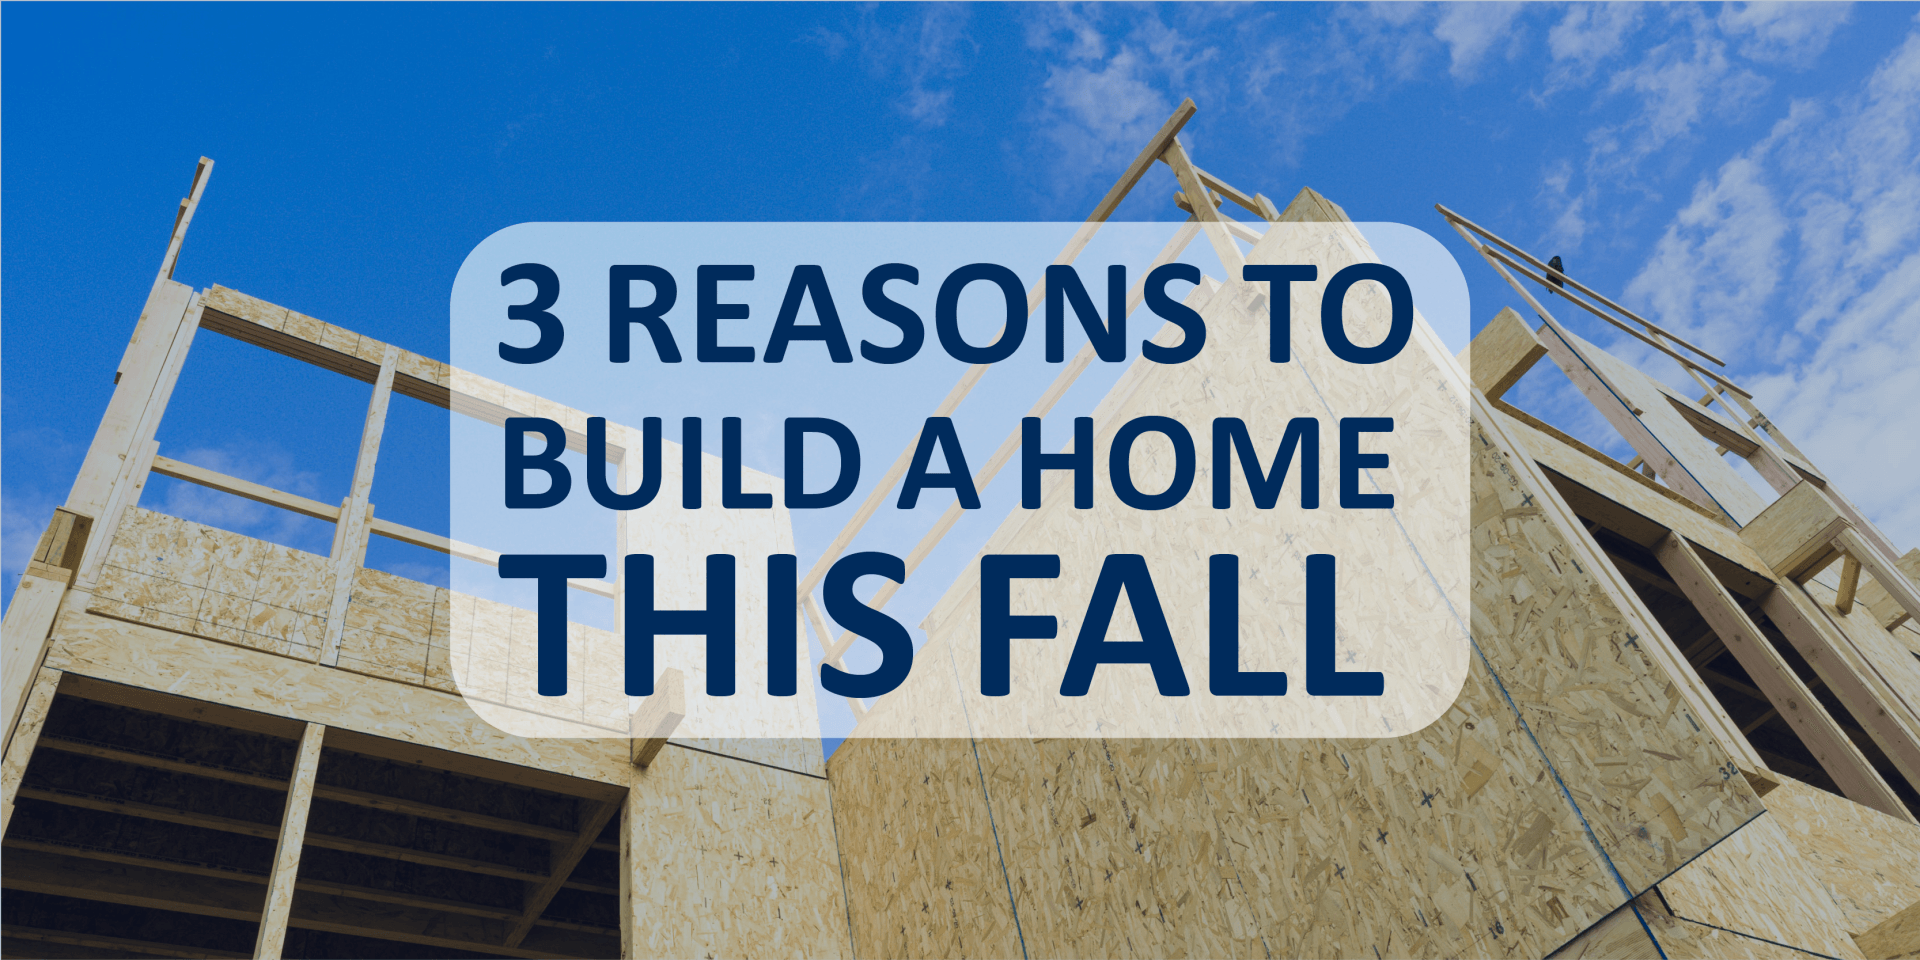 3 Reasons to Build a Home This Fall